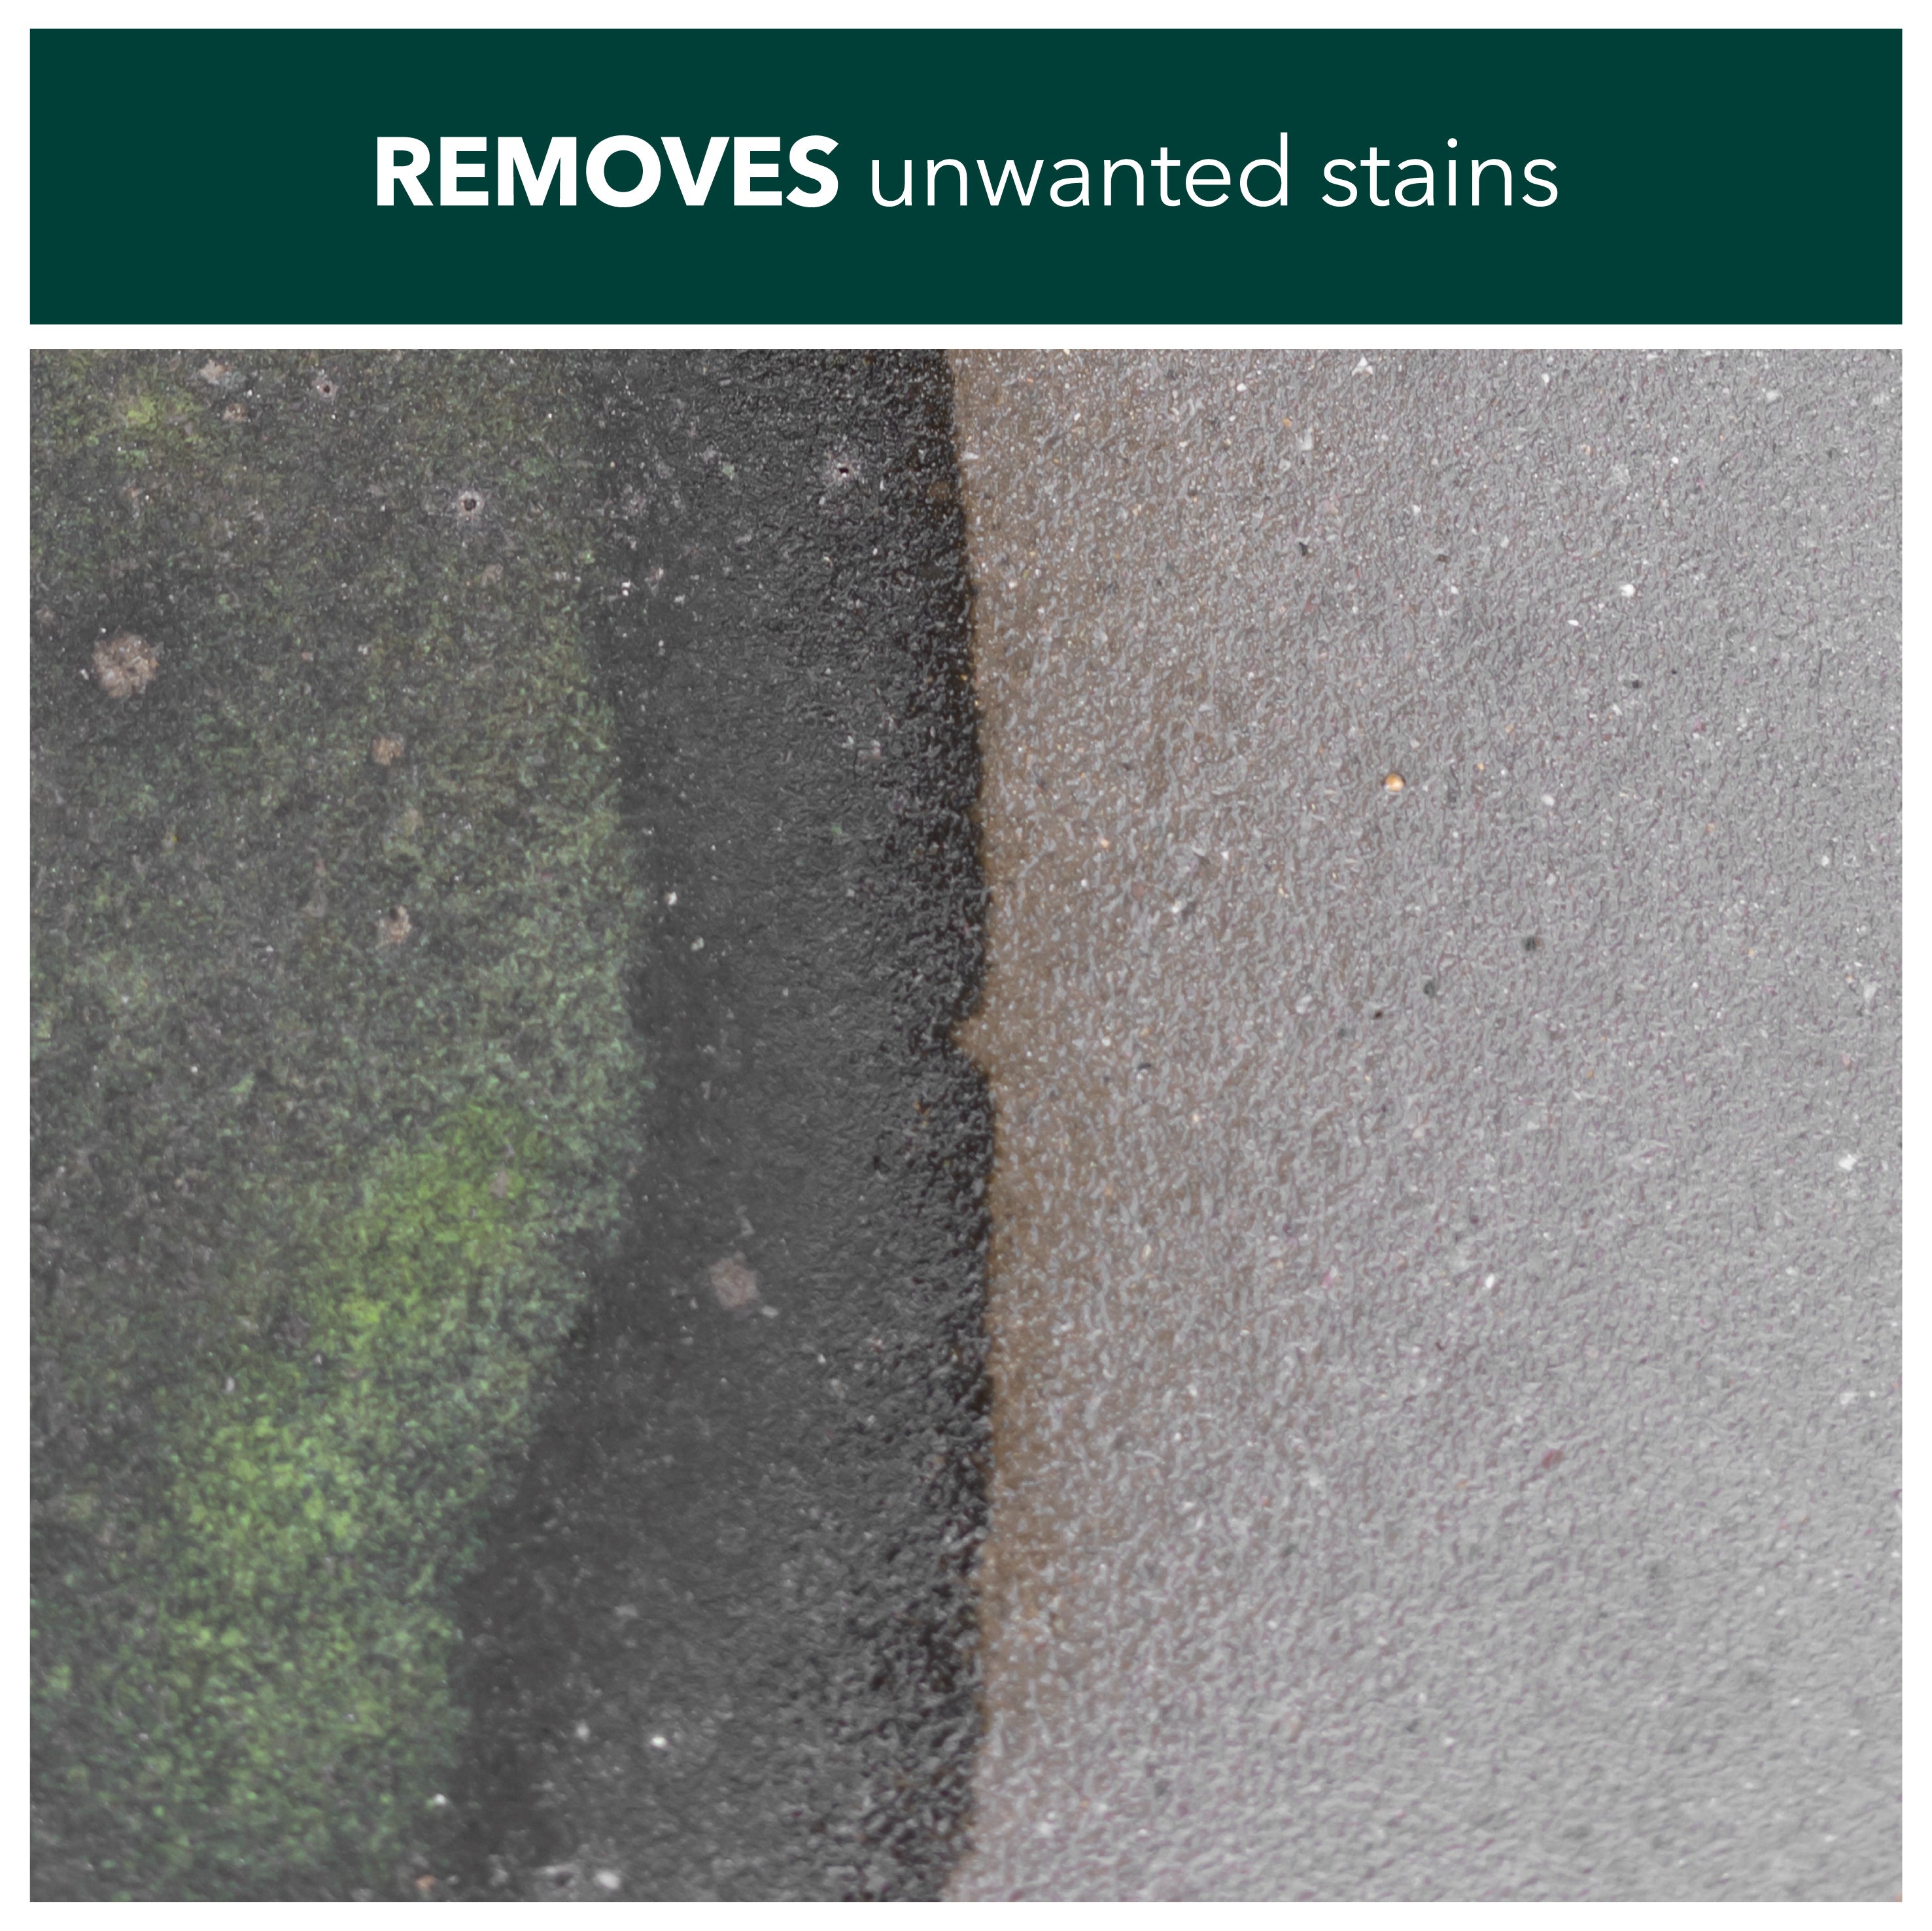 Removes unwanted stains